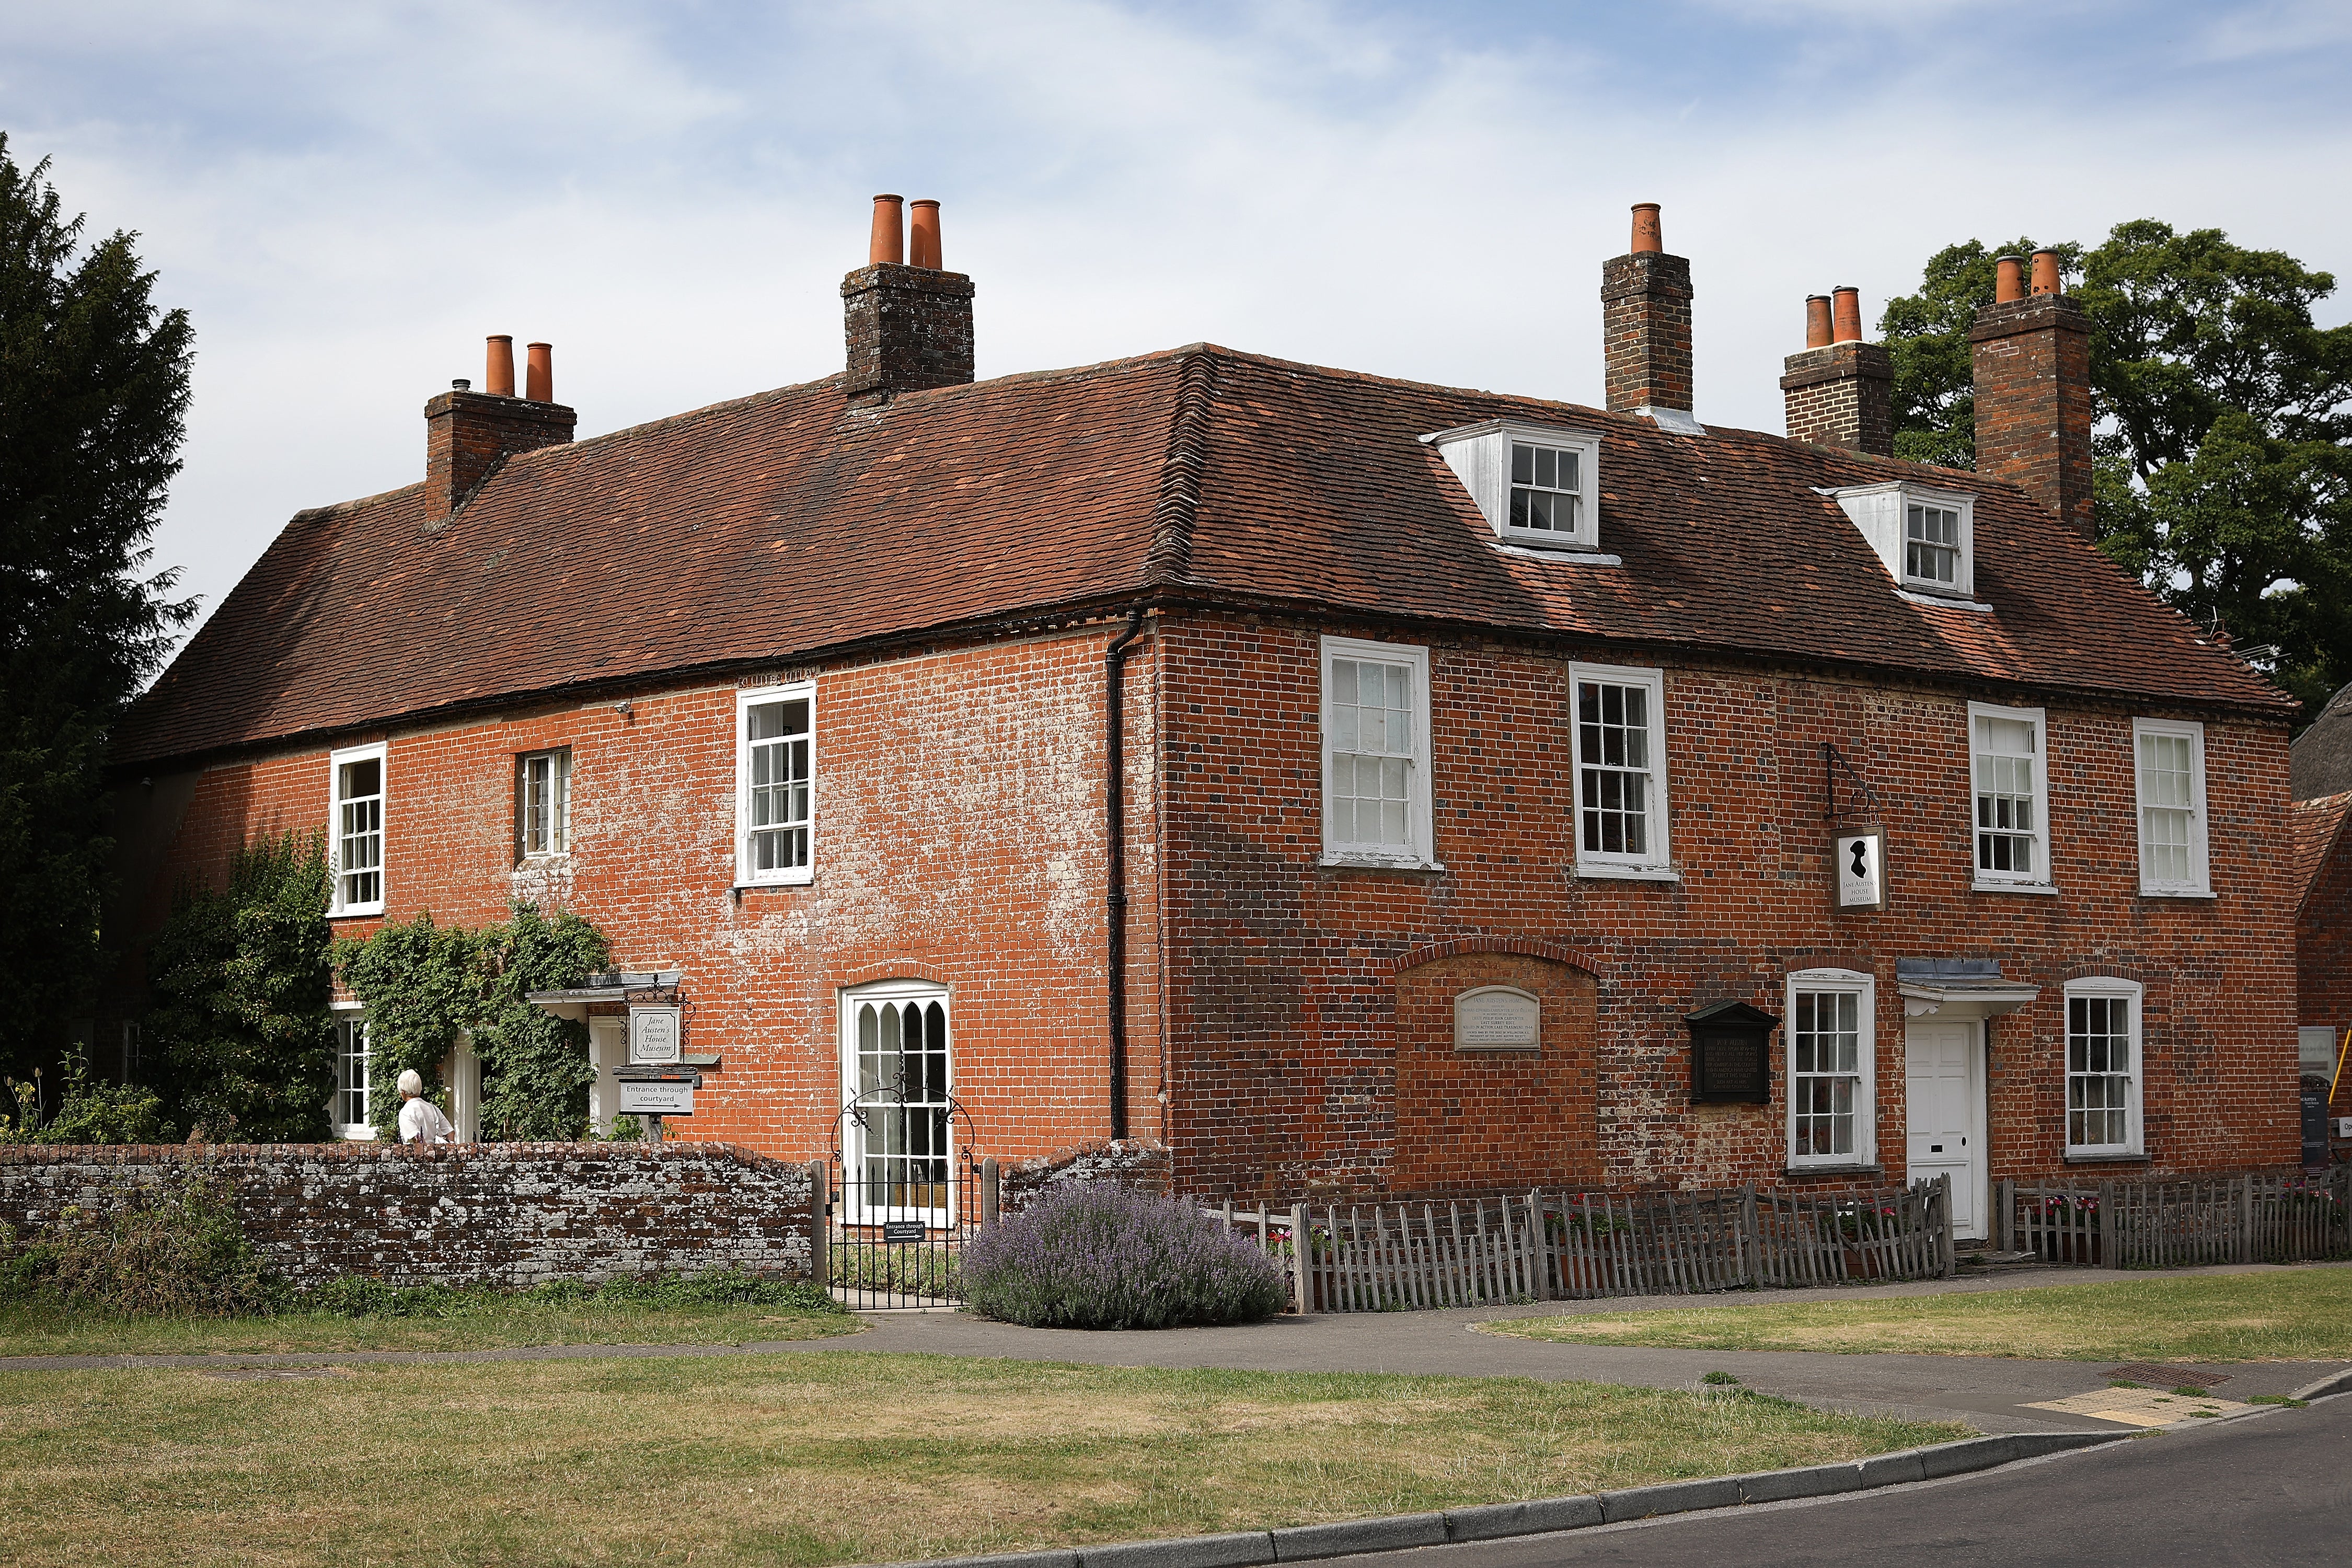 Austen’s House in Chawton is the Hampshire cottage where the author lived and wrote